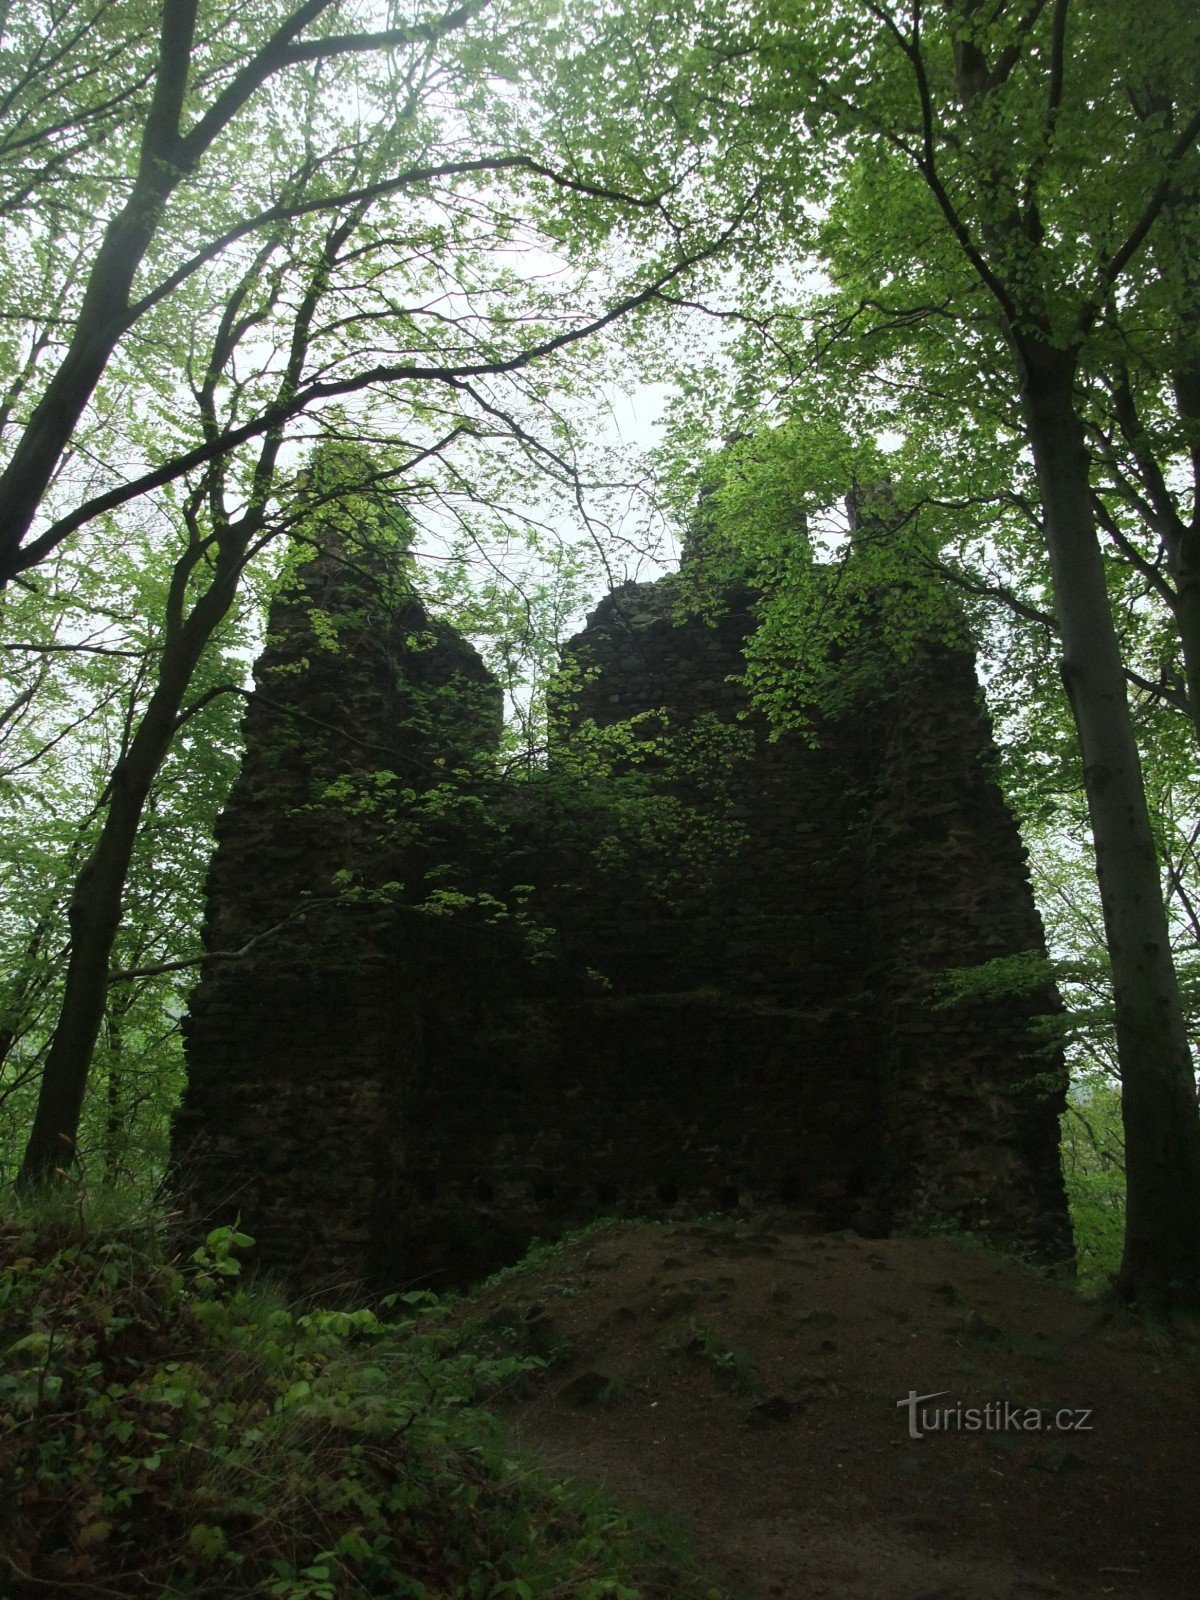 The mysterious Kyšperk Castle in the Ore Mountains